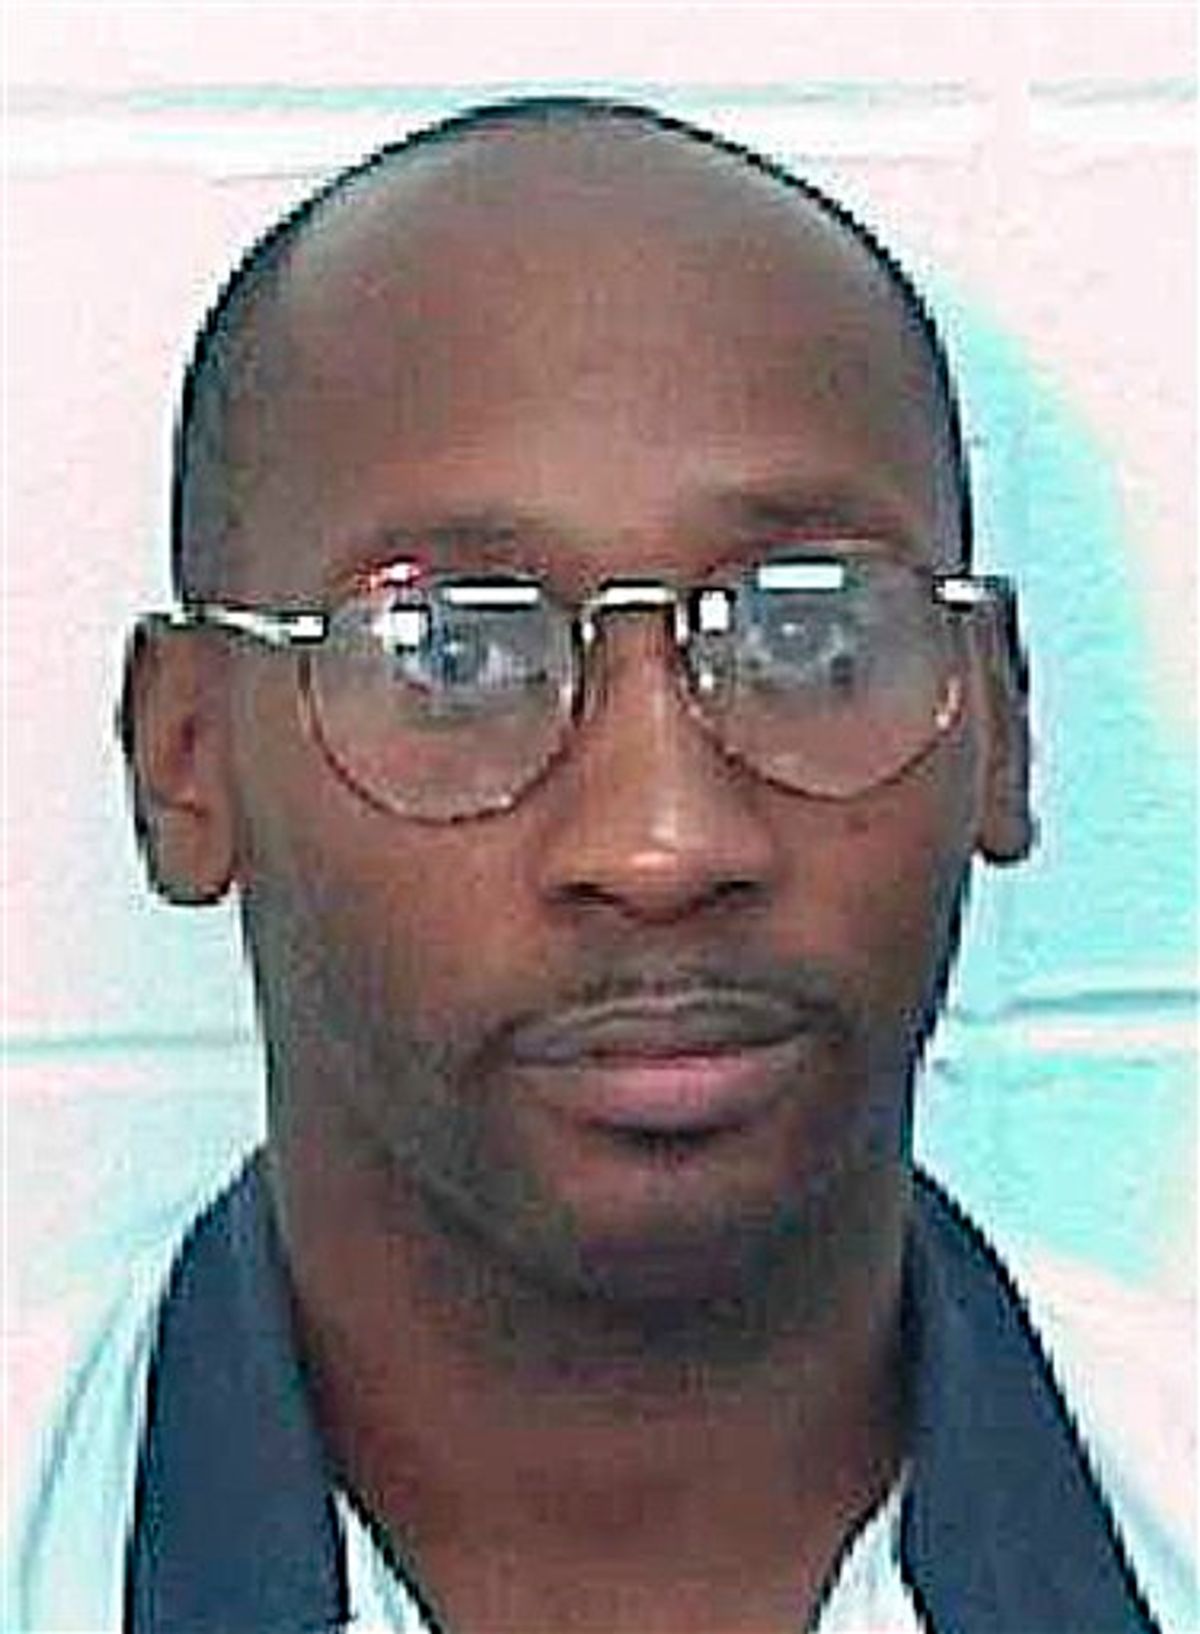 FILE - This undated file photo provided by the Georgia Department of Corrections shows death row inmate Troy Davis. Georgia's pardons board on Tuesday, Sept. 20, 2011, rejected clemency for Davis despite high-profile support for his claim that he was wrongly convicted of killing MacPhail in 1989. Davis is set to die on Wednesday, Sept. 21. It is the fourth time in four years his execution has been scheduled by Georgia officials. (AP Photo/Georgia Department of Corrections, File) (AP)